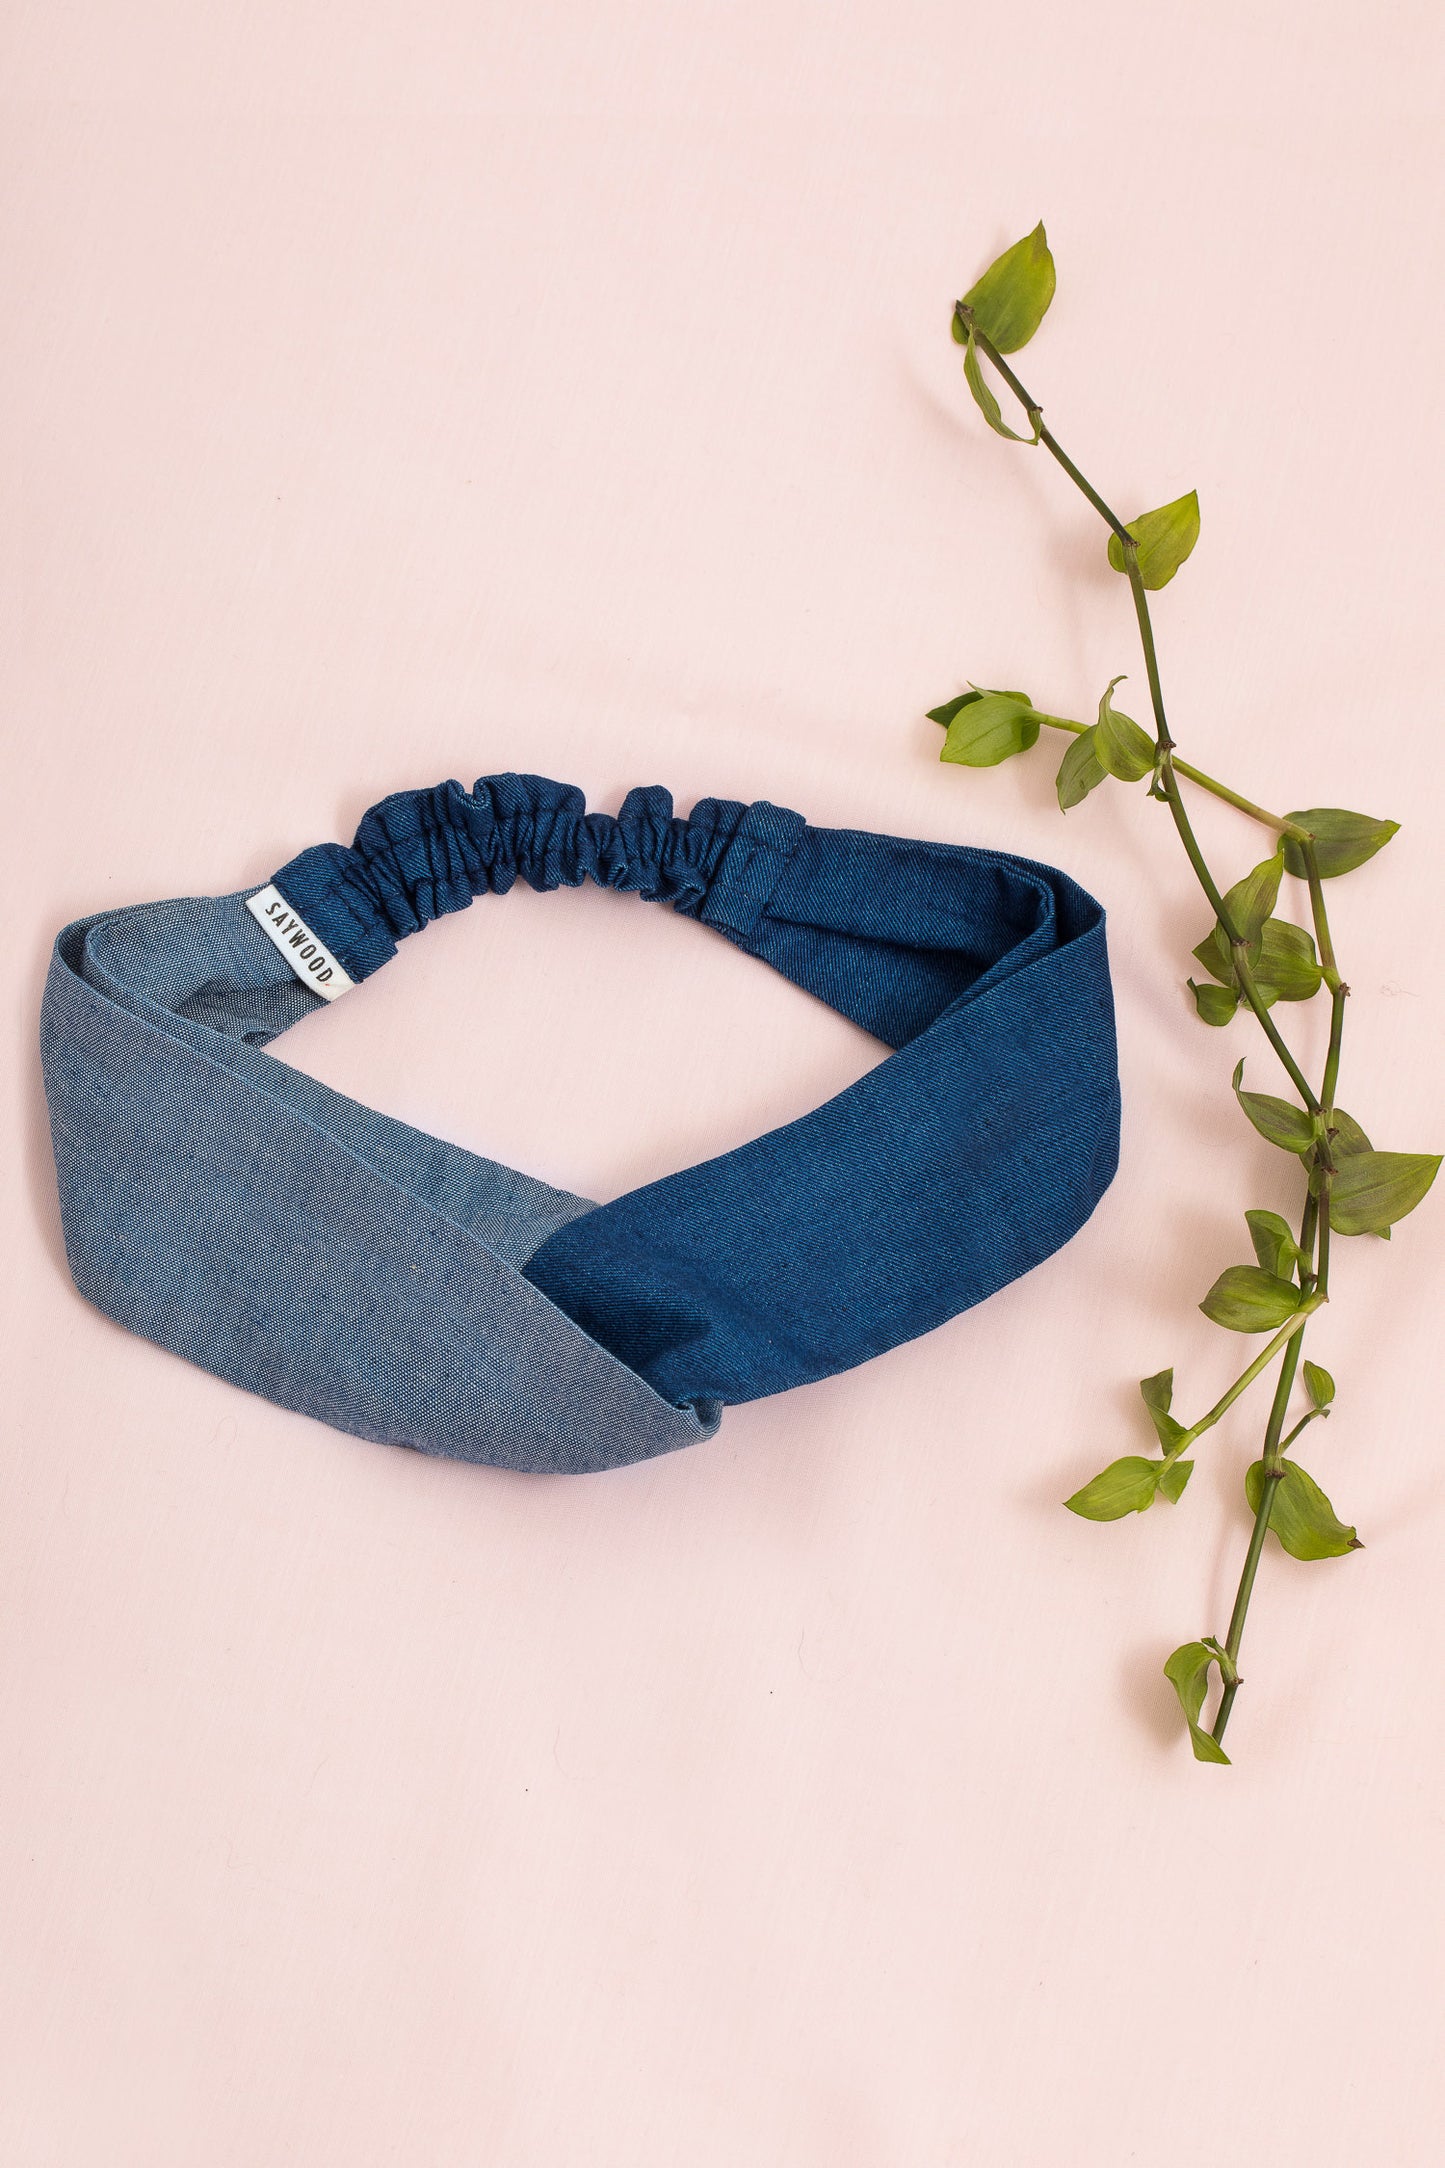 Saywood's Thandi Headband with twist effect, made from contrasting mid wash and light wash natural indigo Japanese denim. Laid on a pale pink background with green foliage.